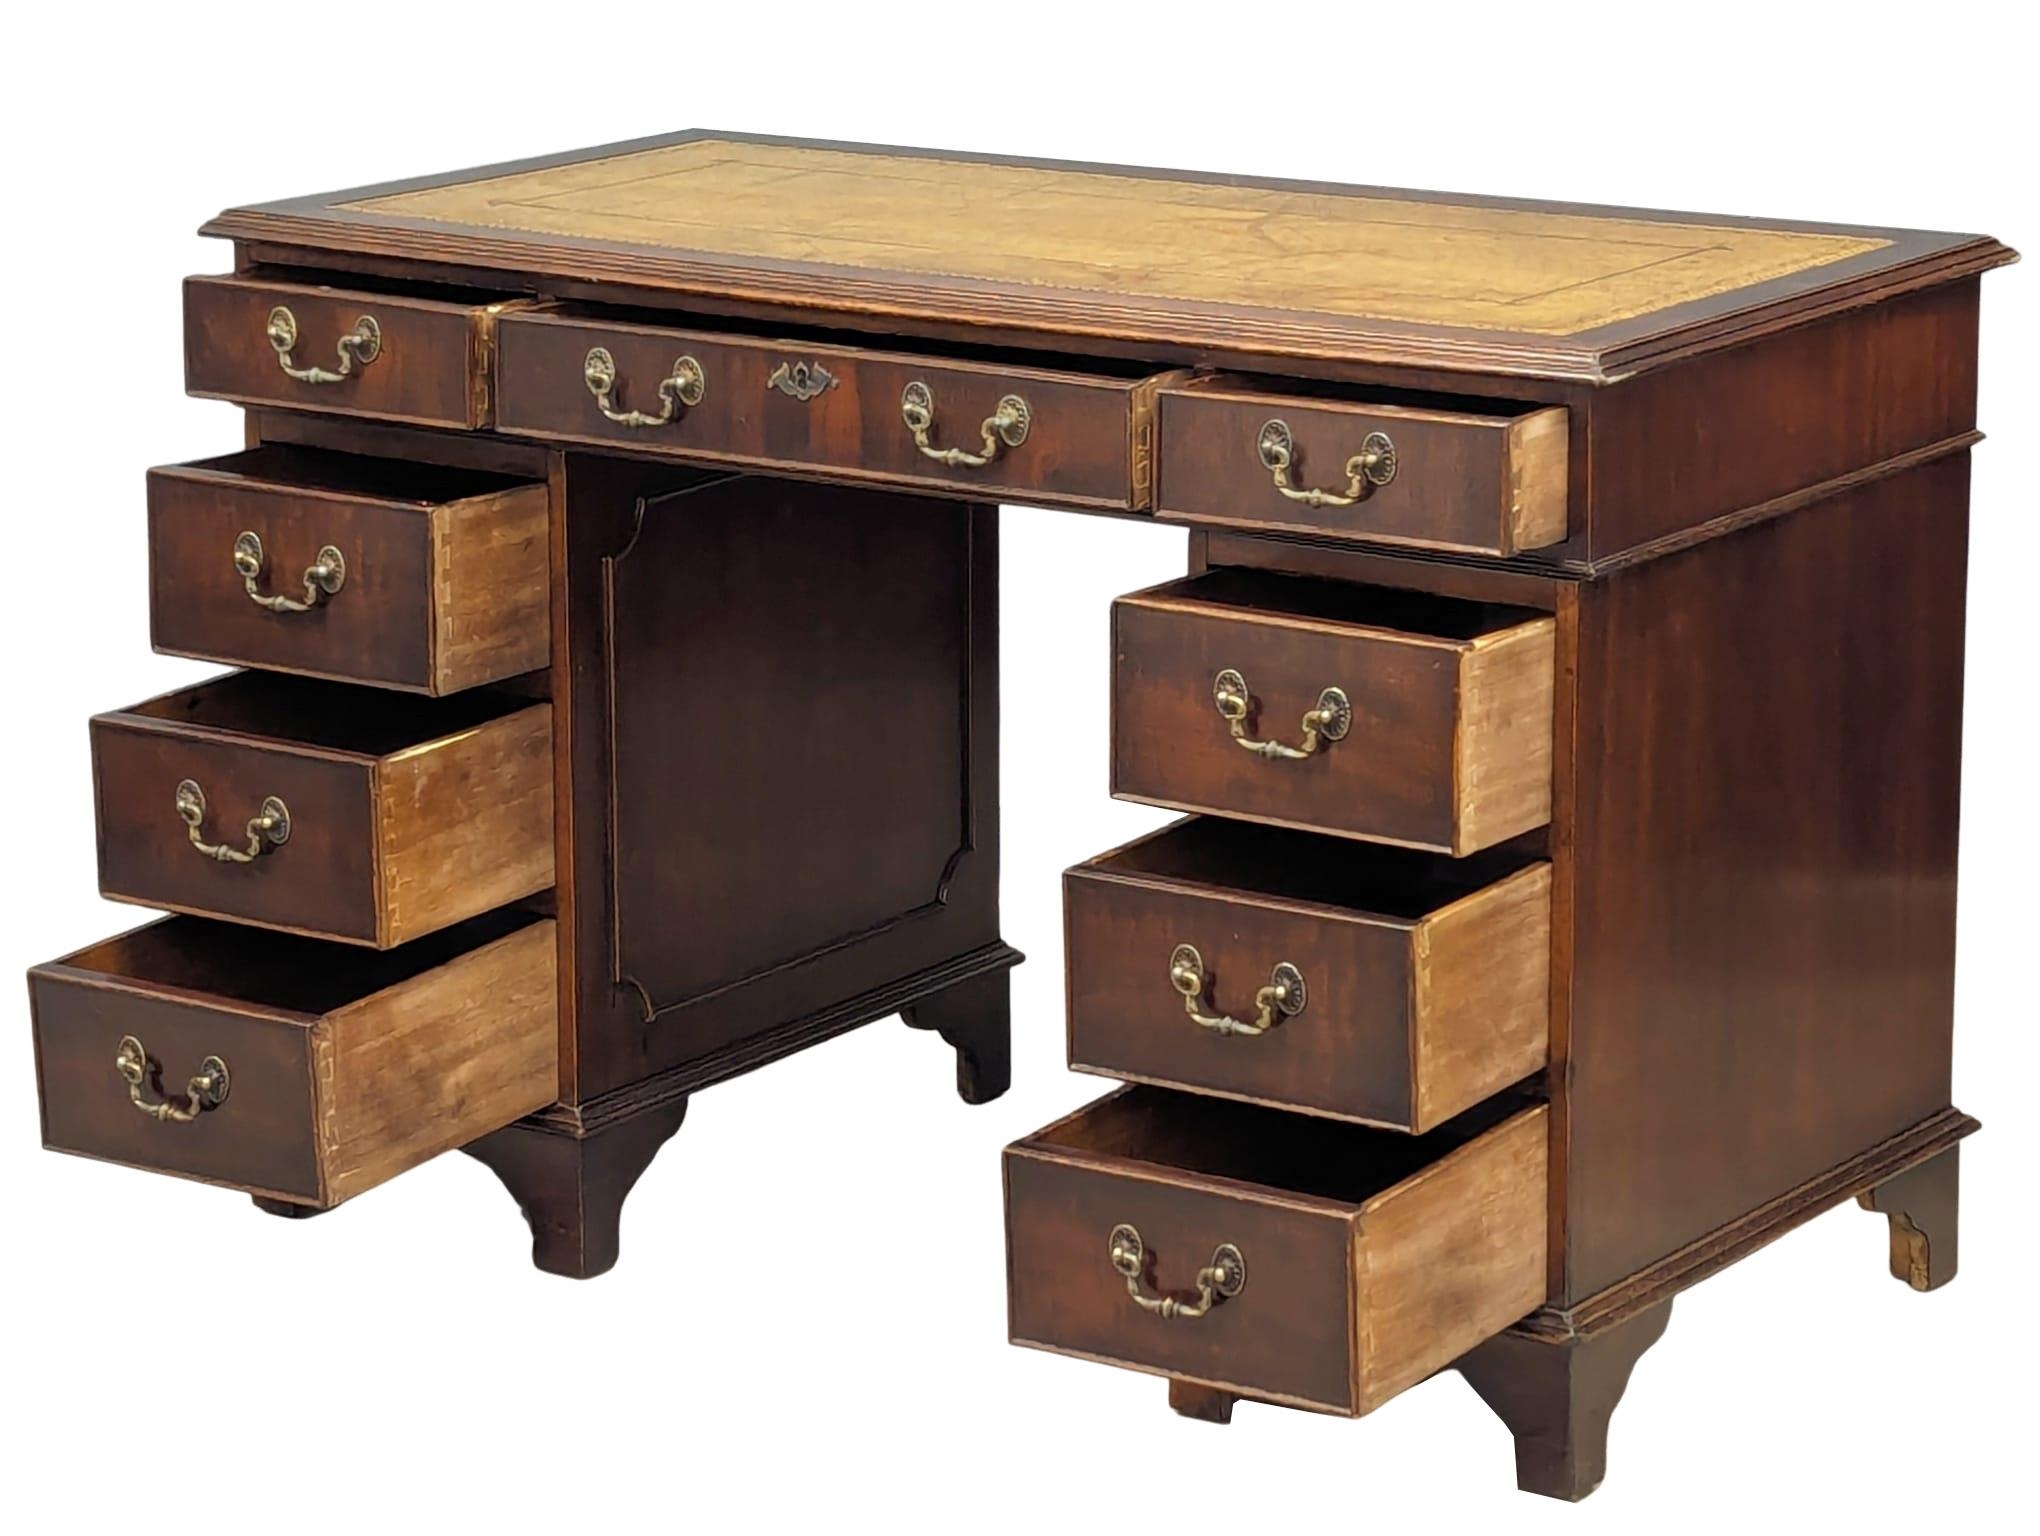 A George III style mahogany leather top desk, 118cm x 60cm x 77cm - Image 2 of 8